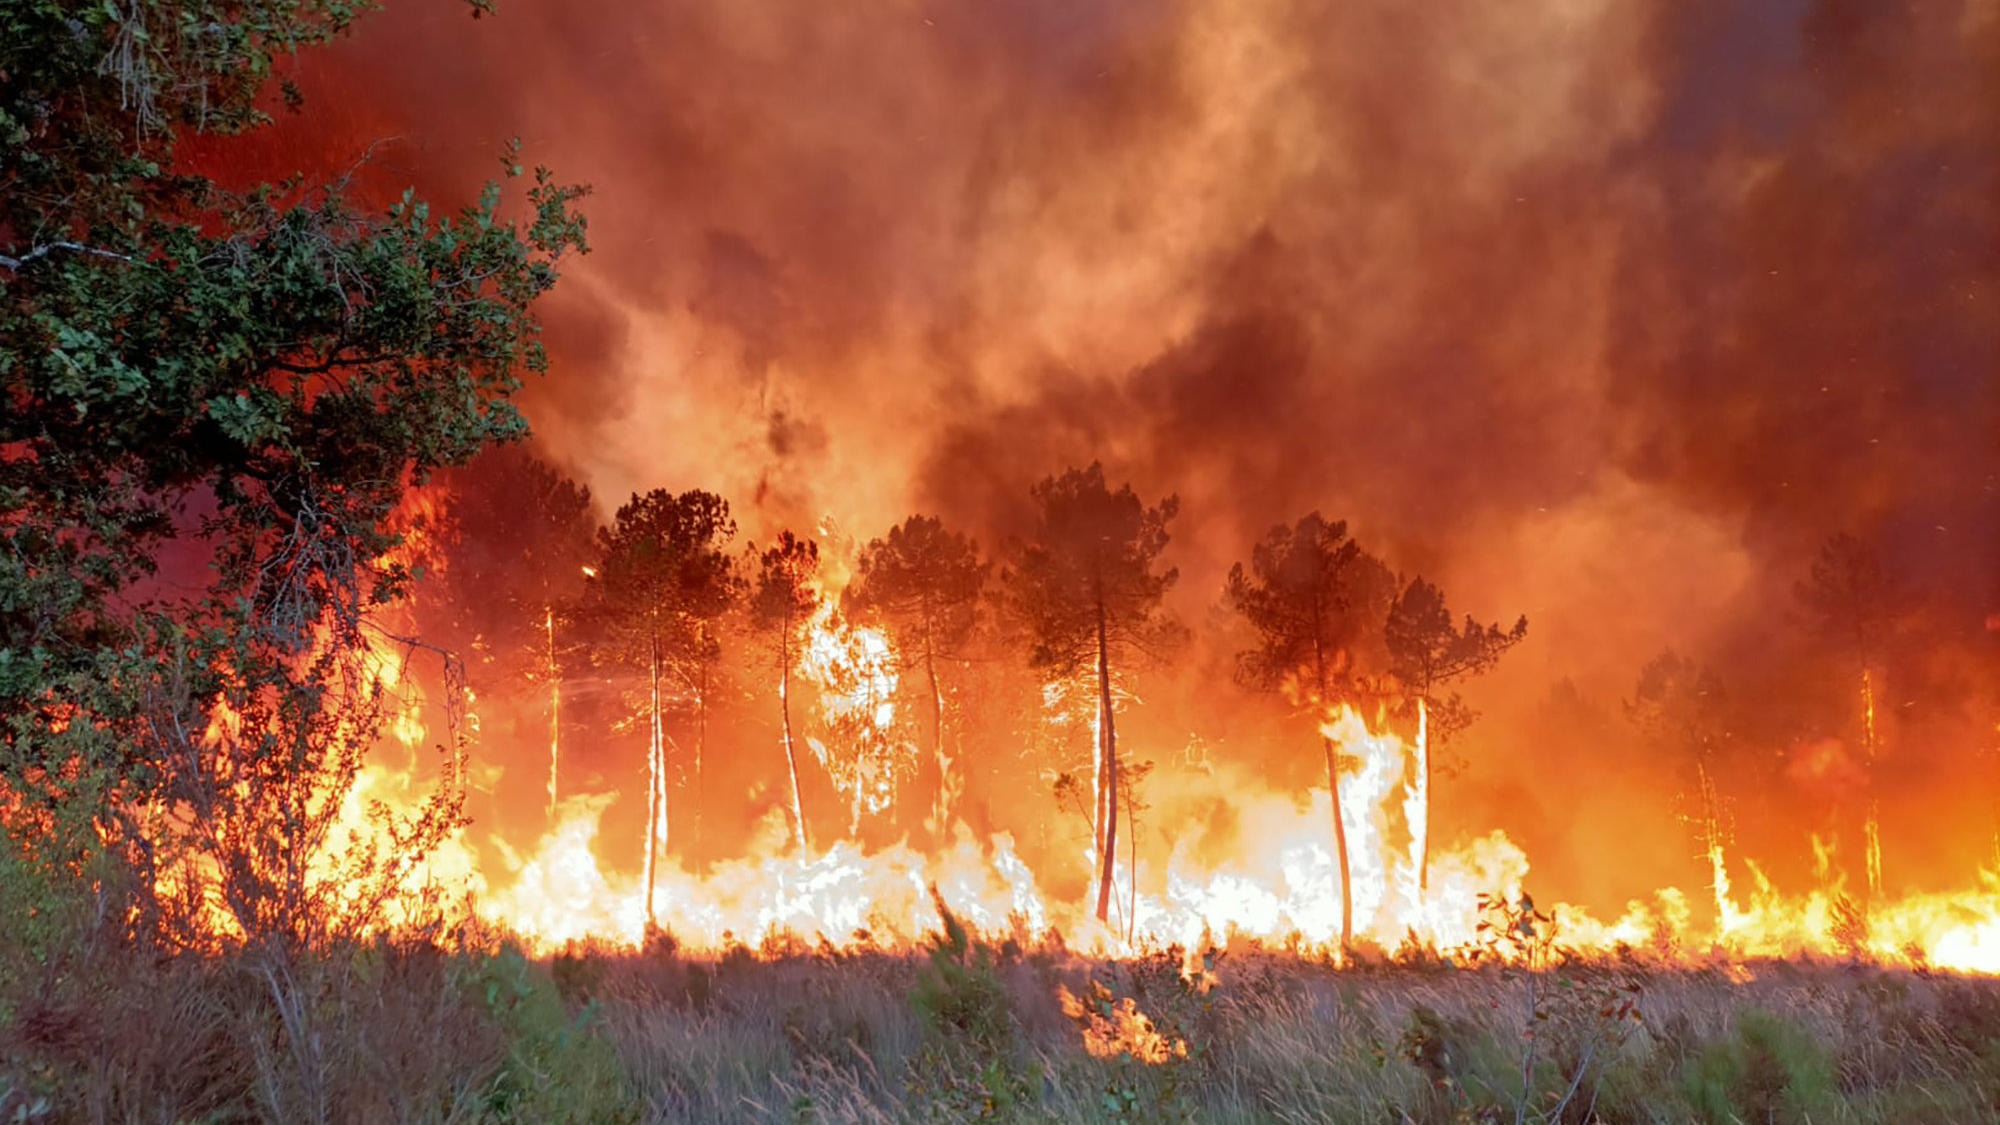 This photo provided Friday July 15, 2022 by the fire brigade of the Gironde region (SDIS 33) shows a wildfire near Landiras, southwestern France, Thursday, July 14, 2022. Several hundred firefighters struggled Friday to contain two wildfires in the B